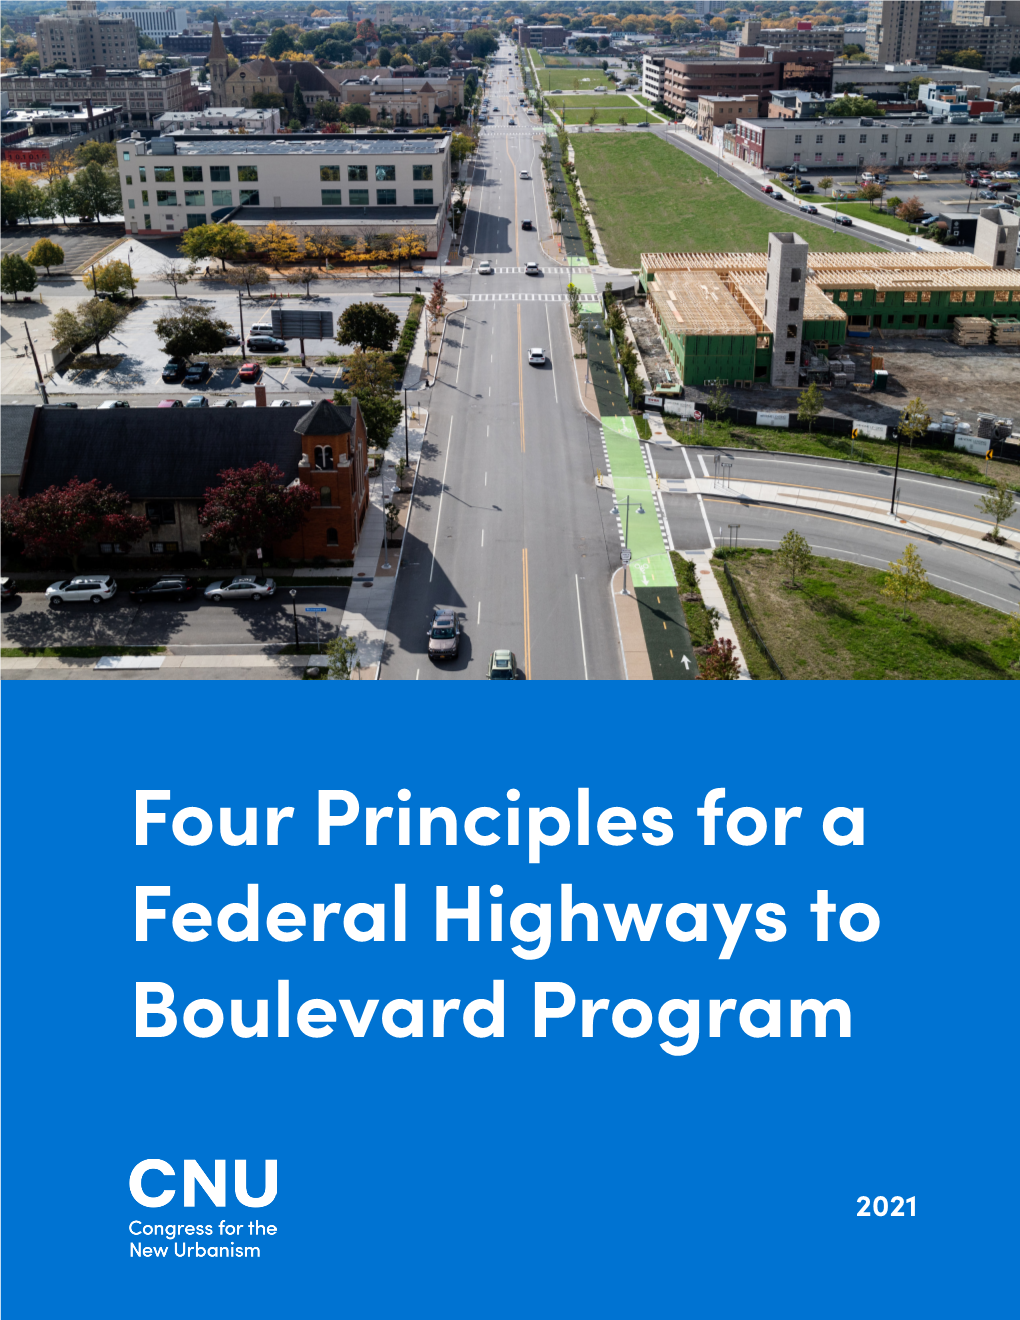 Four Principles for a Federal Highways to Boulevard Program